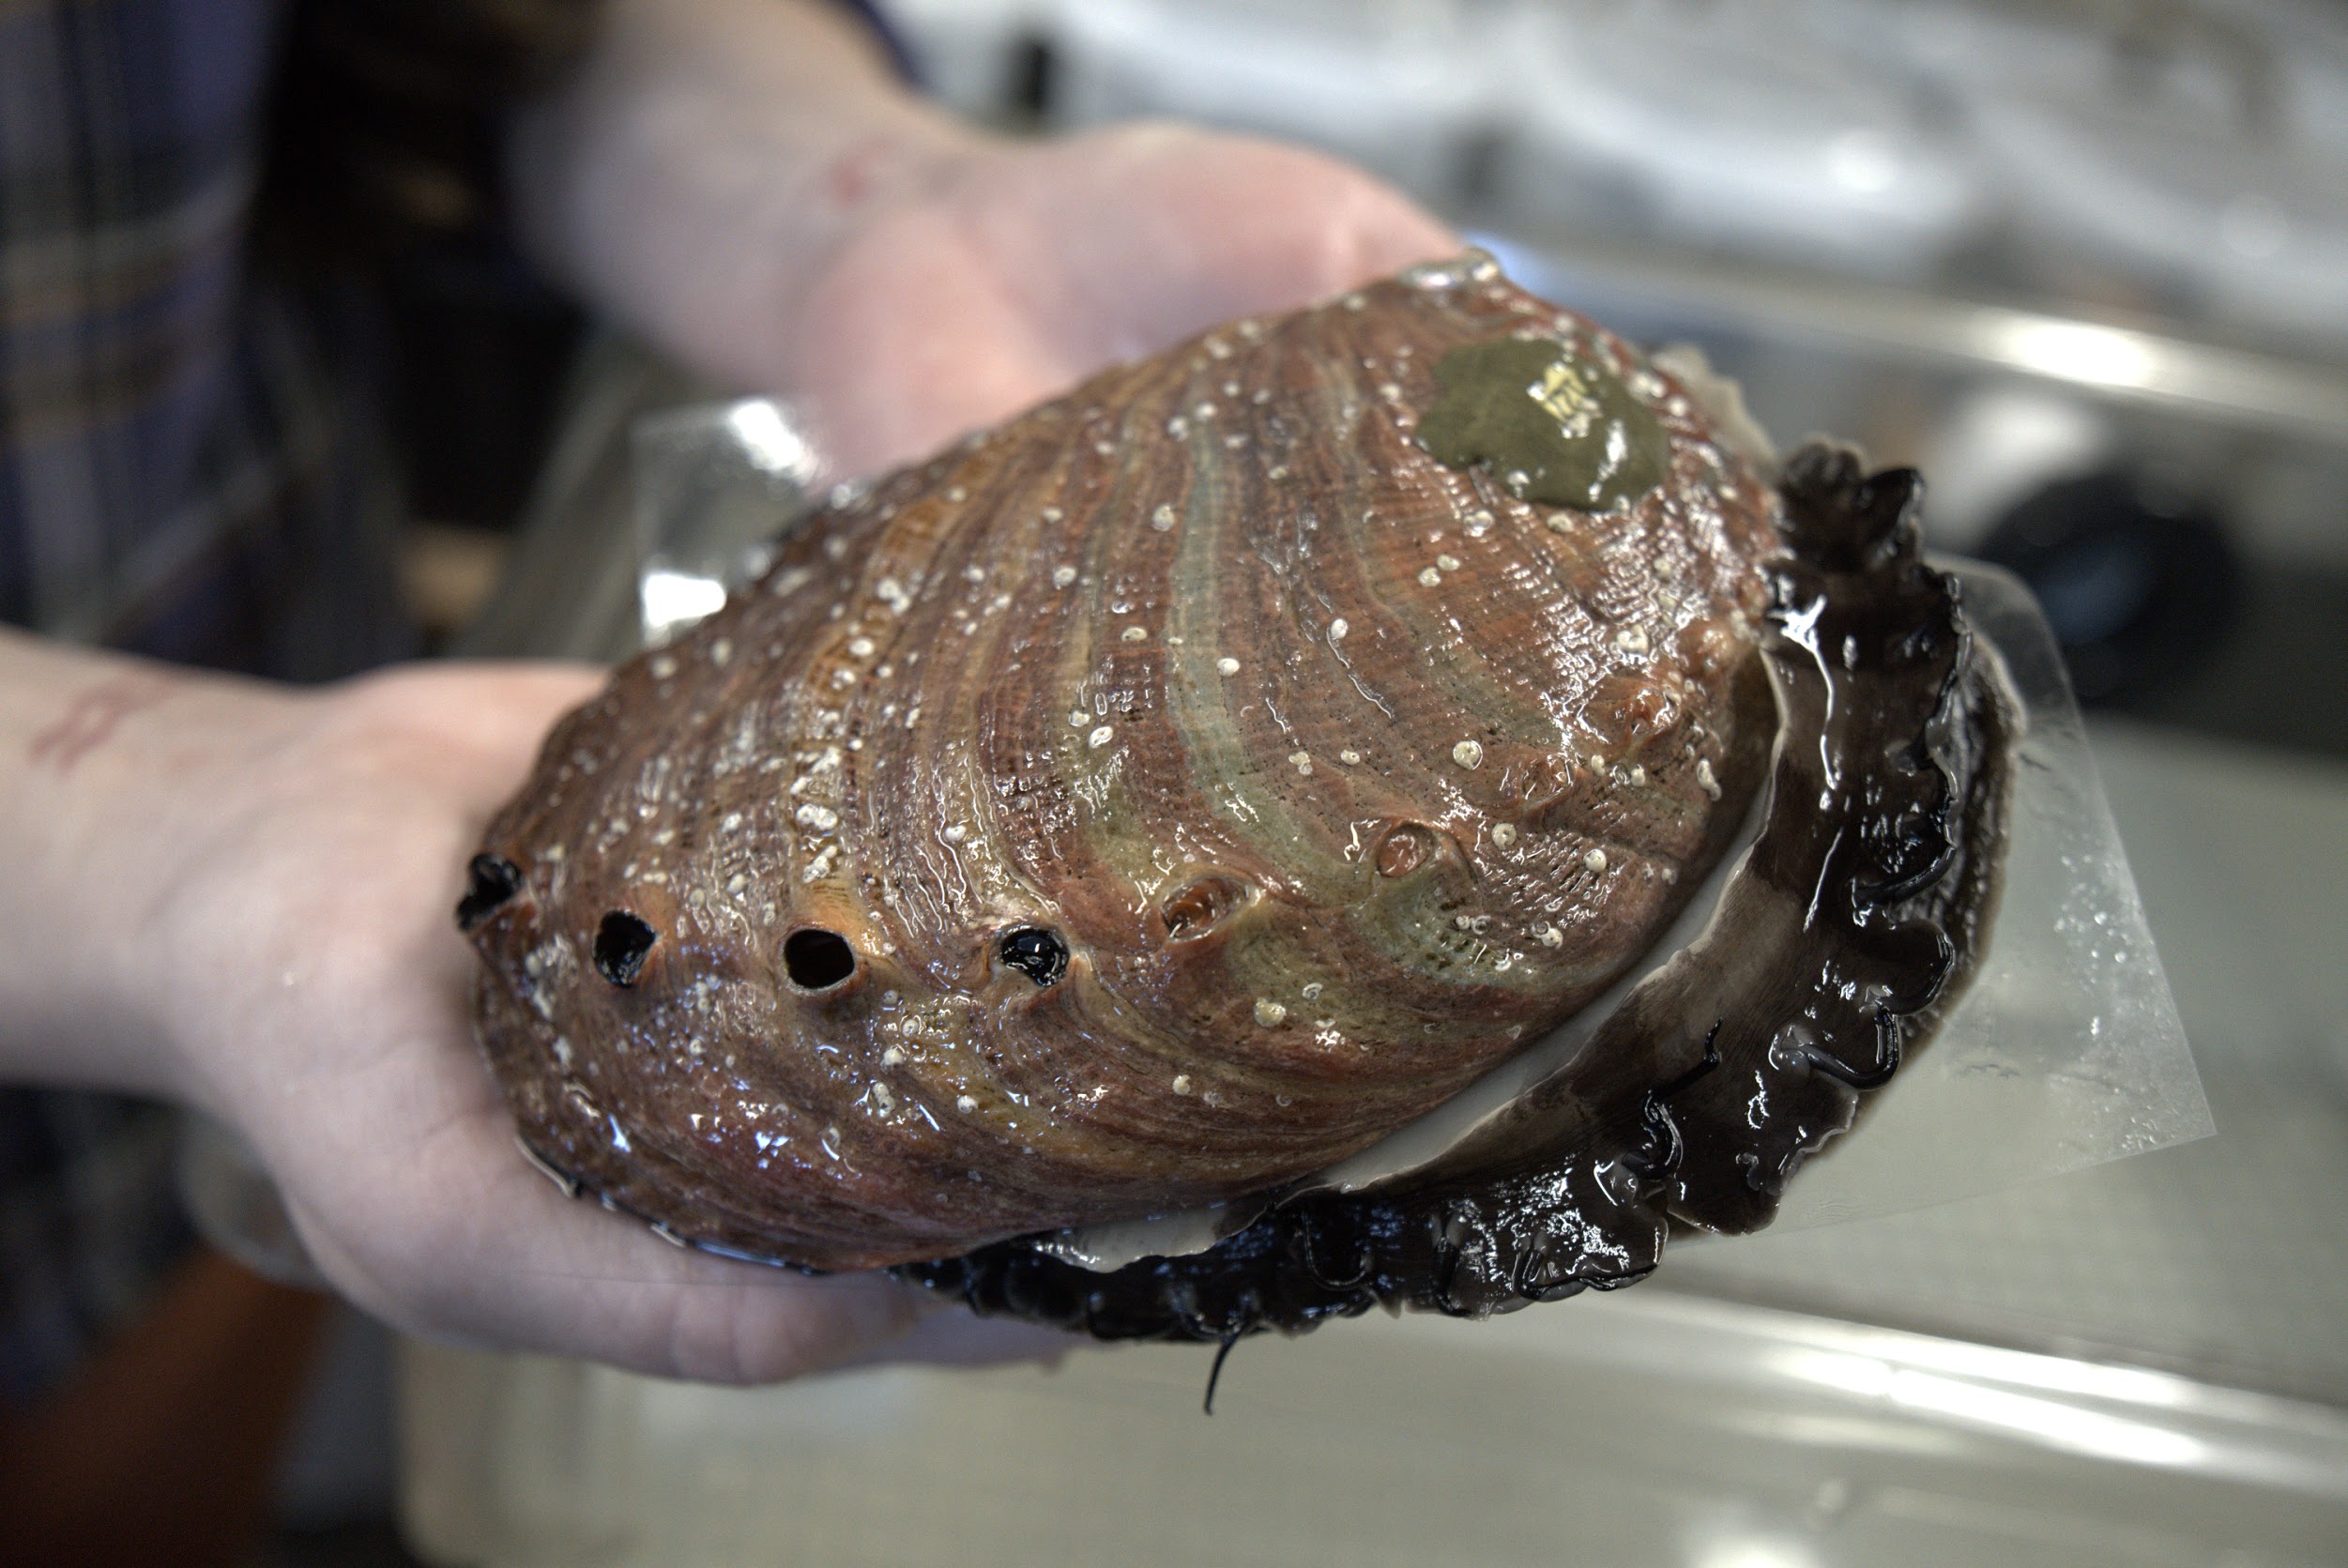 Farmed and captive-raised red abalone served as a proxy for endangered black abalone in UC Davis experiments to test if ultrasounds could be an effective, noninvasive means of assessing abalone’s reproductive health. (Jackson Gross/UC Davis)